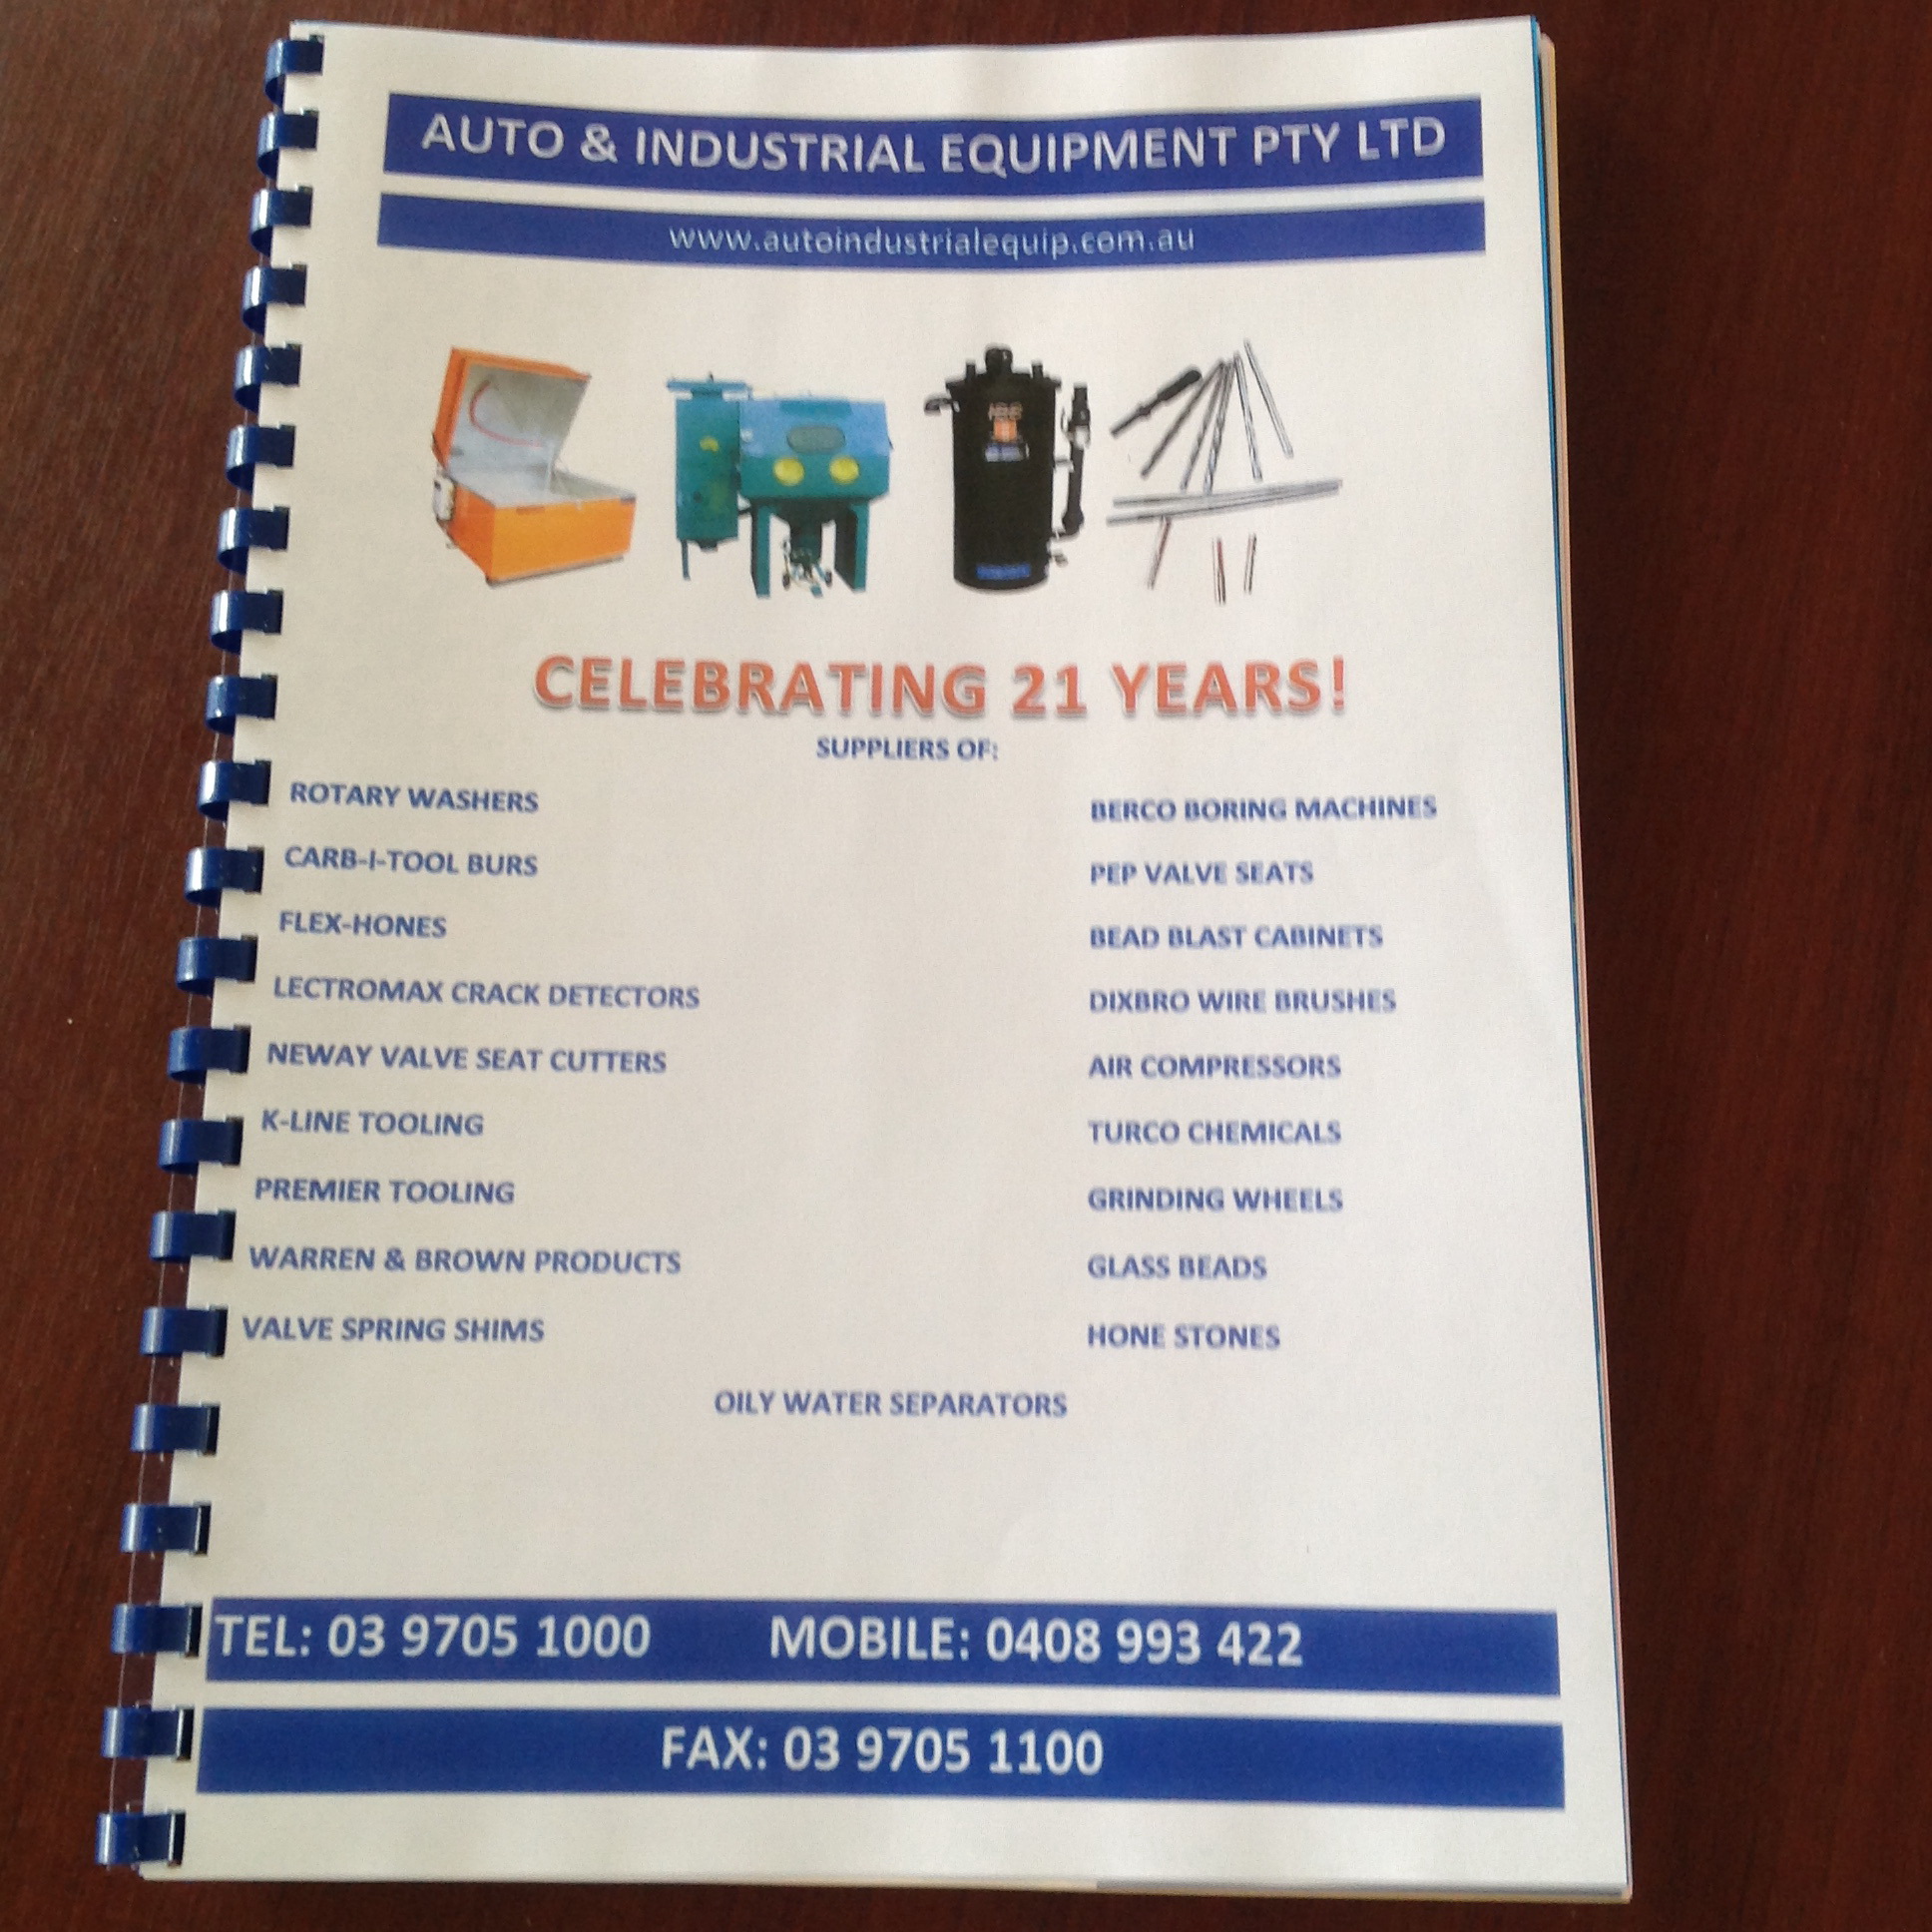 Get Your Copy of Auto and Industrial Equipment’s Full Catalogue